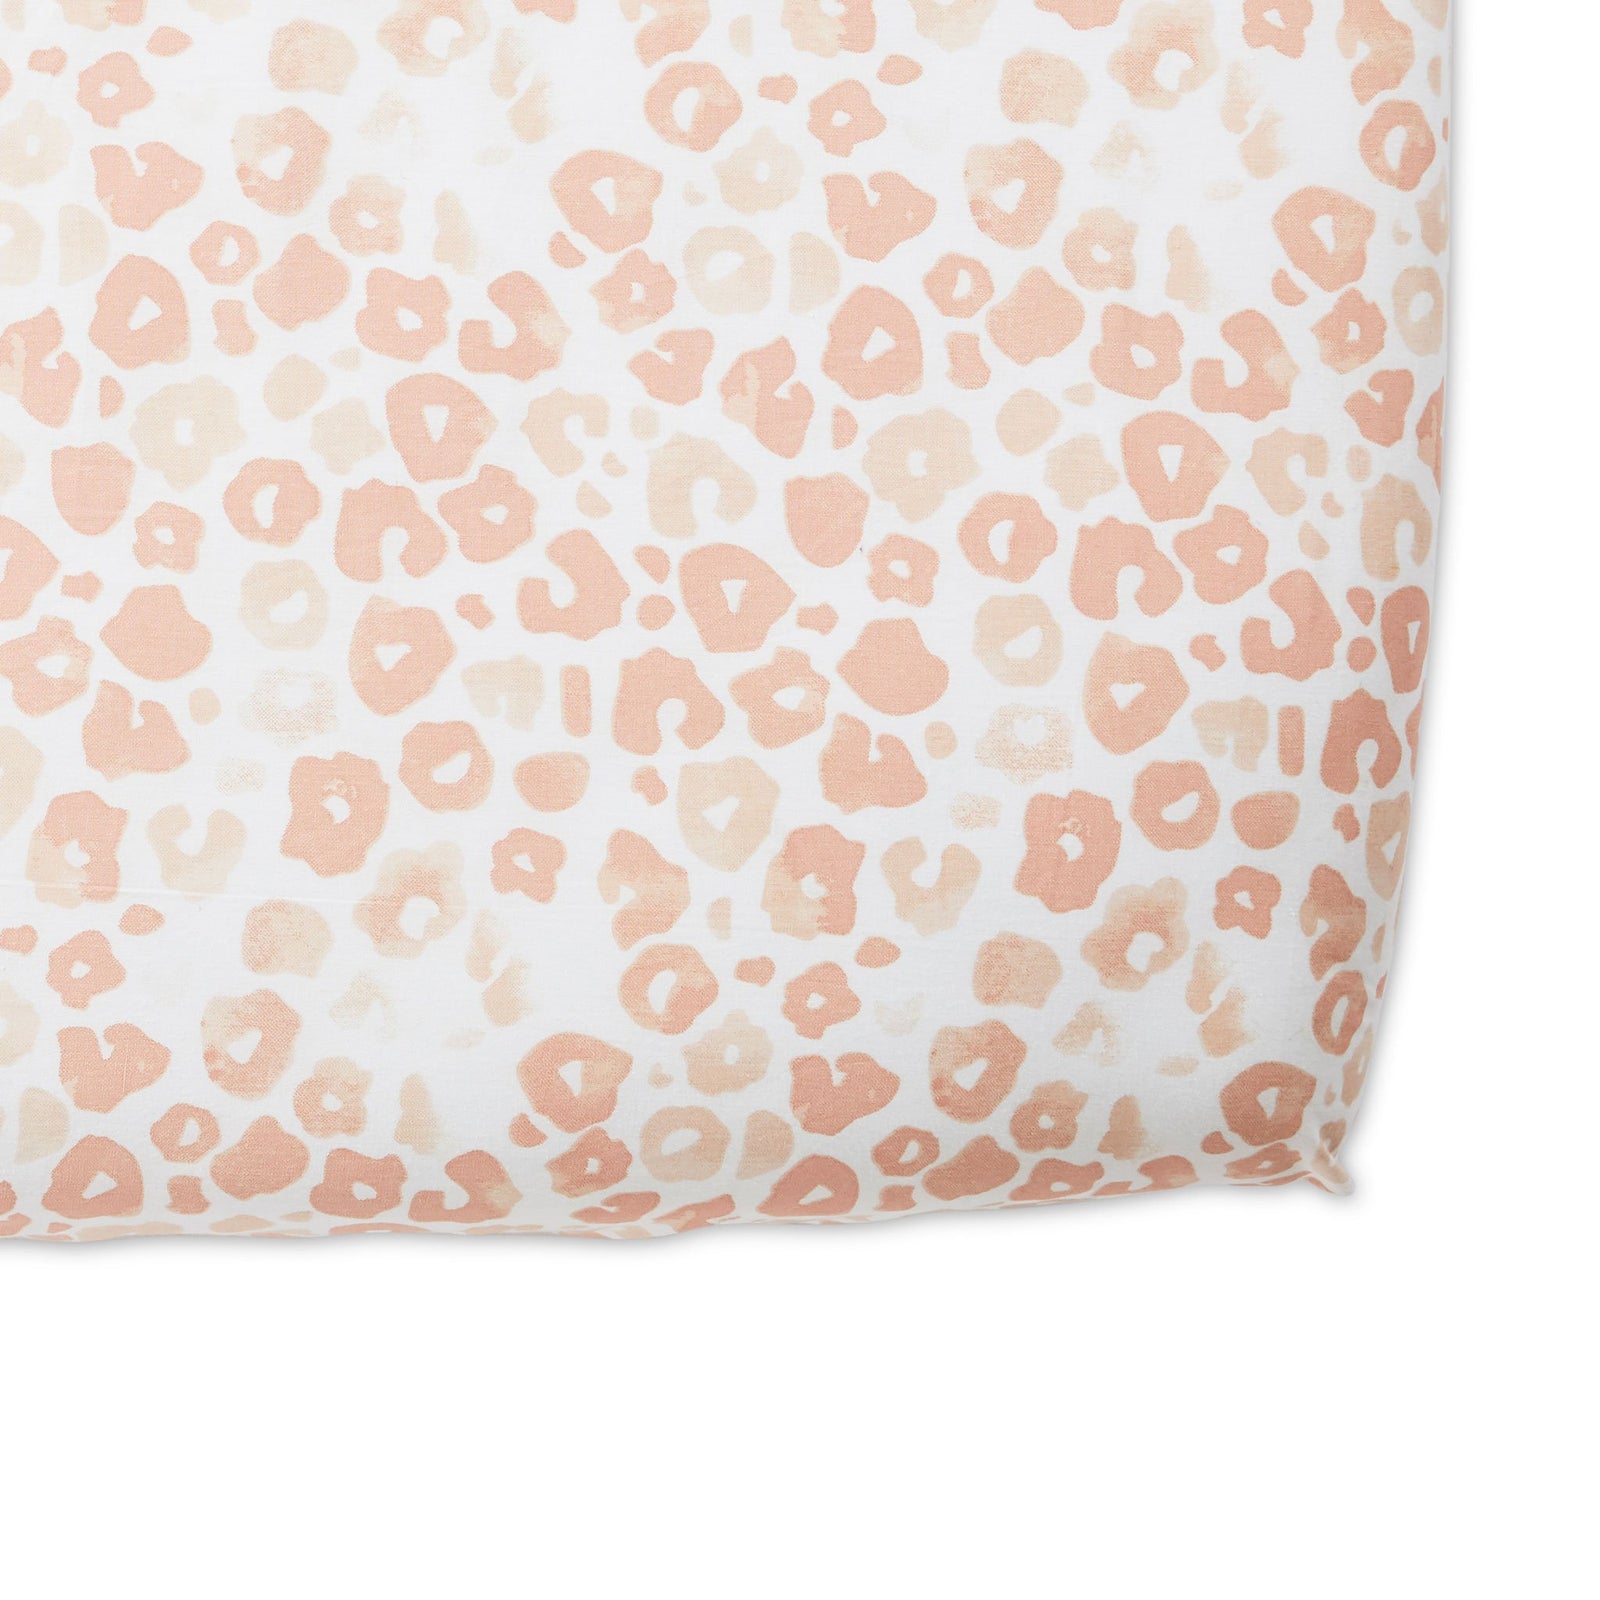 Pehr Poppy Blush Organic Crib Sheet. GOTS Certified Organic Cotton. Screen printed by hand using AZO-Free dyes. White with blush pink poppies.